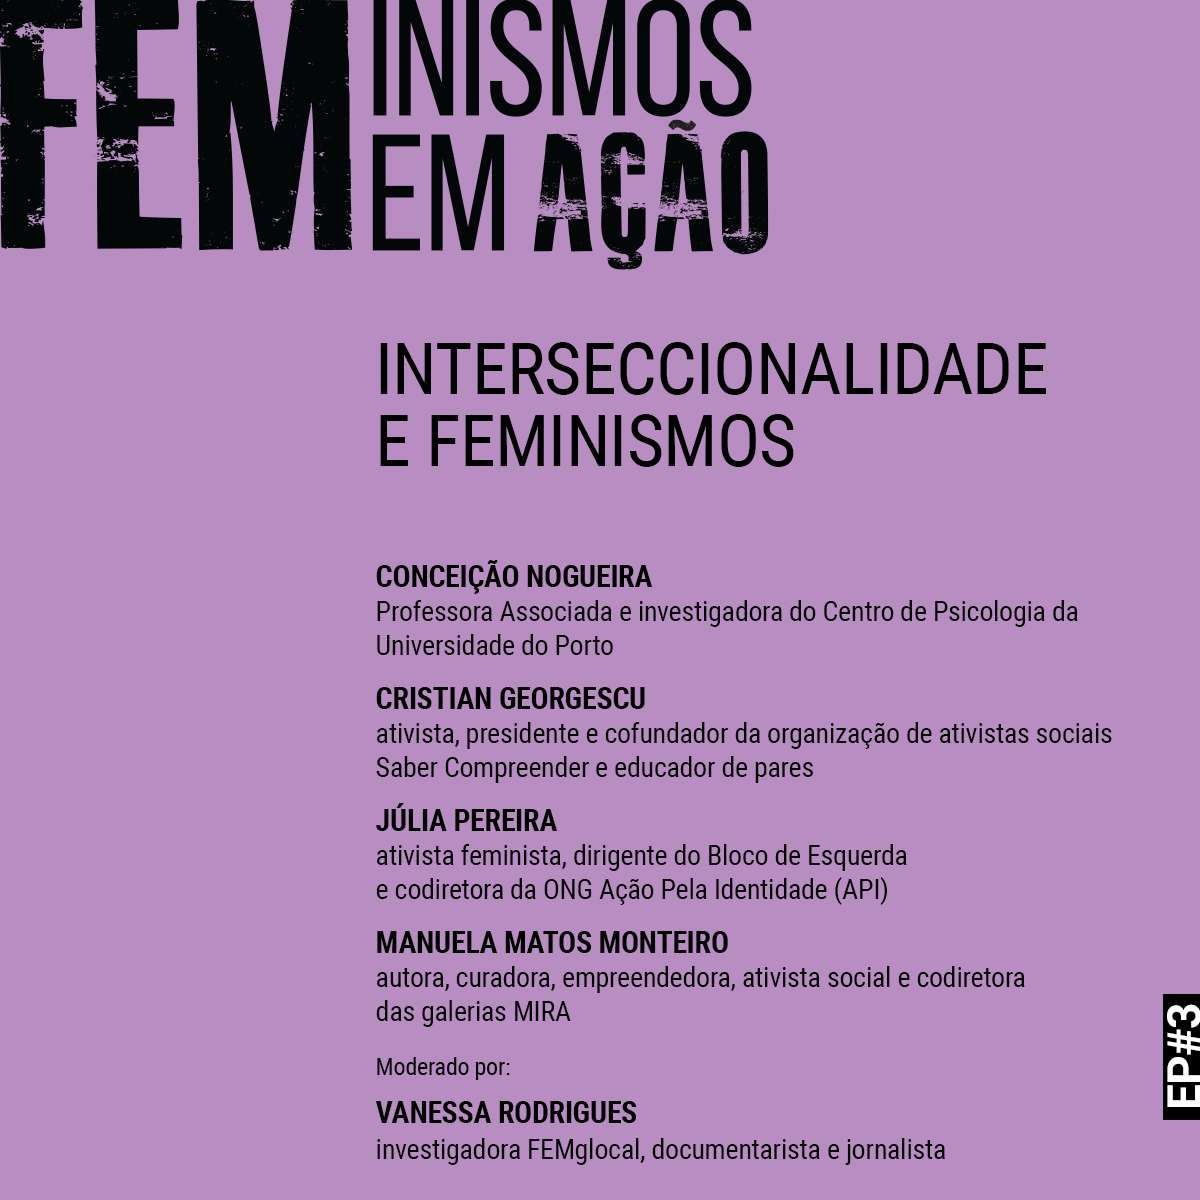 Feminisms in Action: Intersectionality and Feminisms